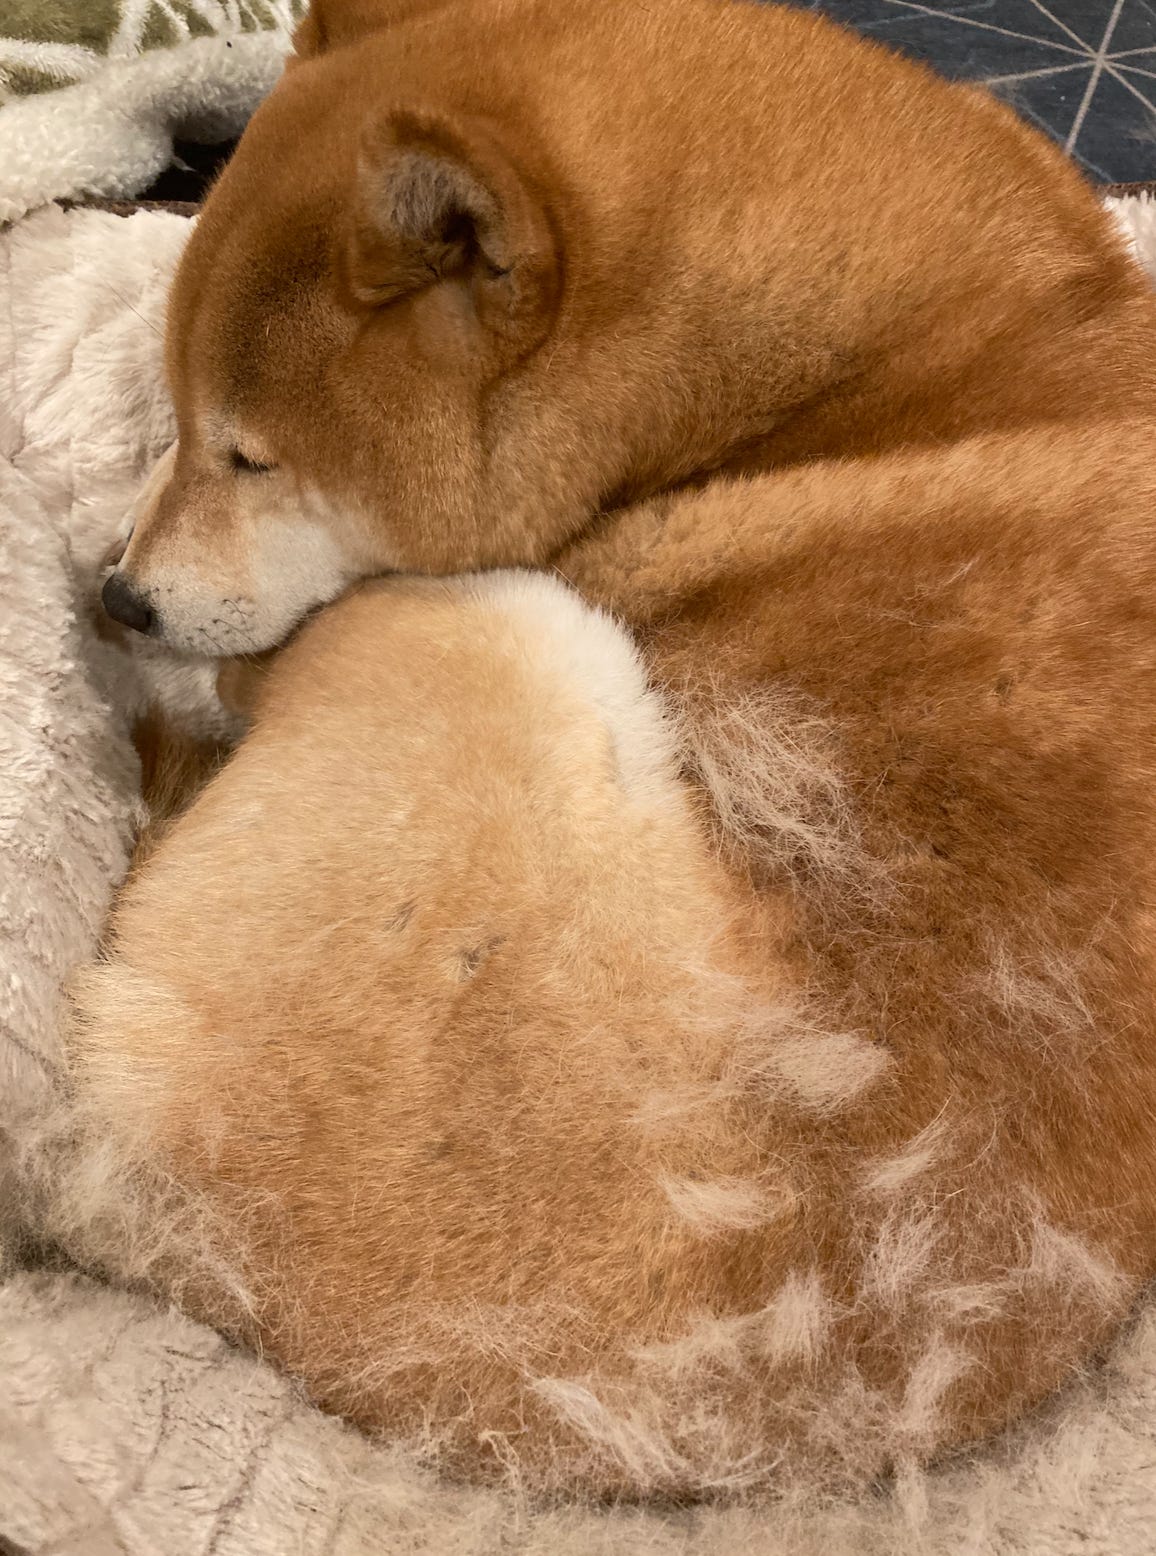 A curled up dog blanketed by her shedding fur